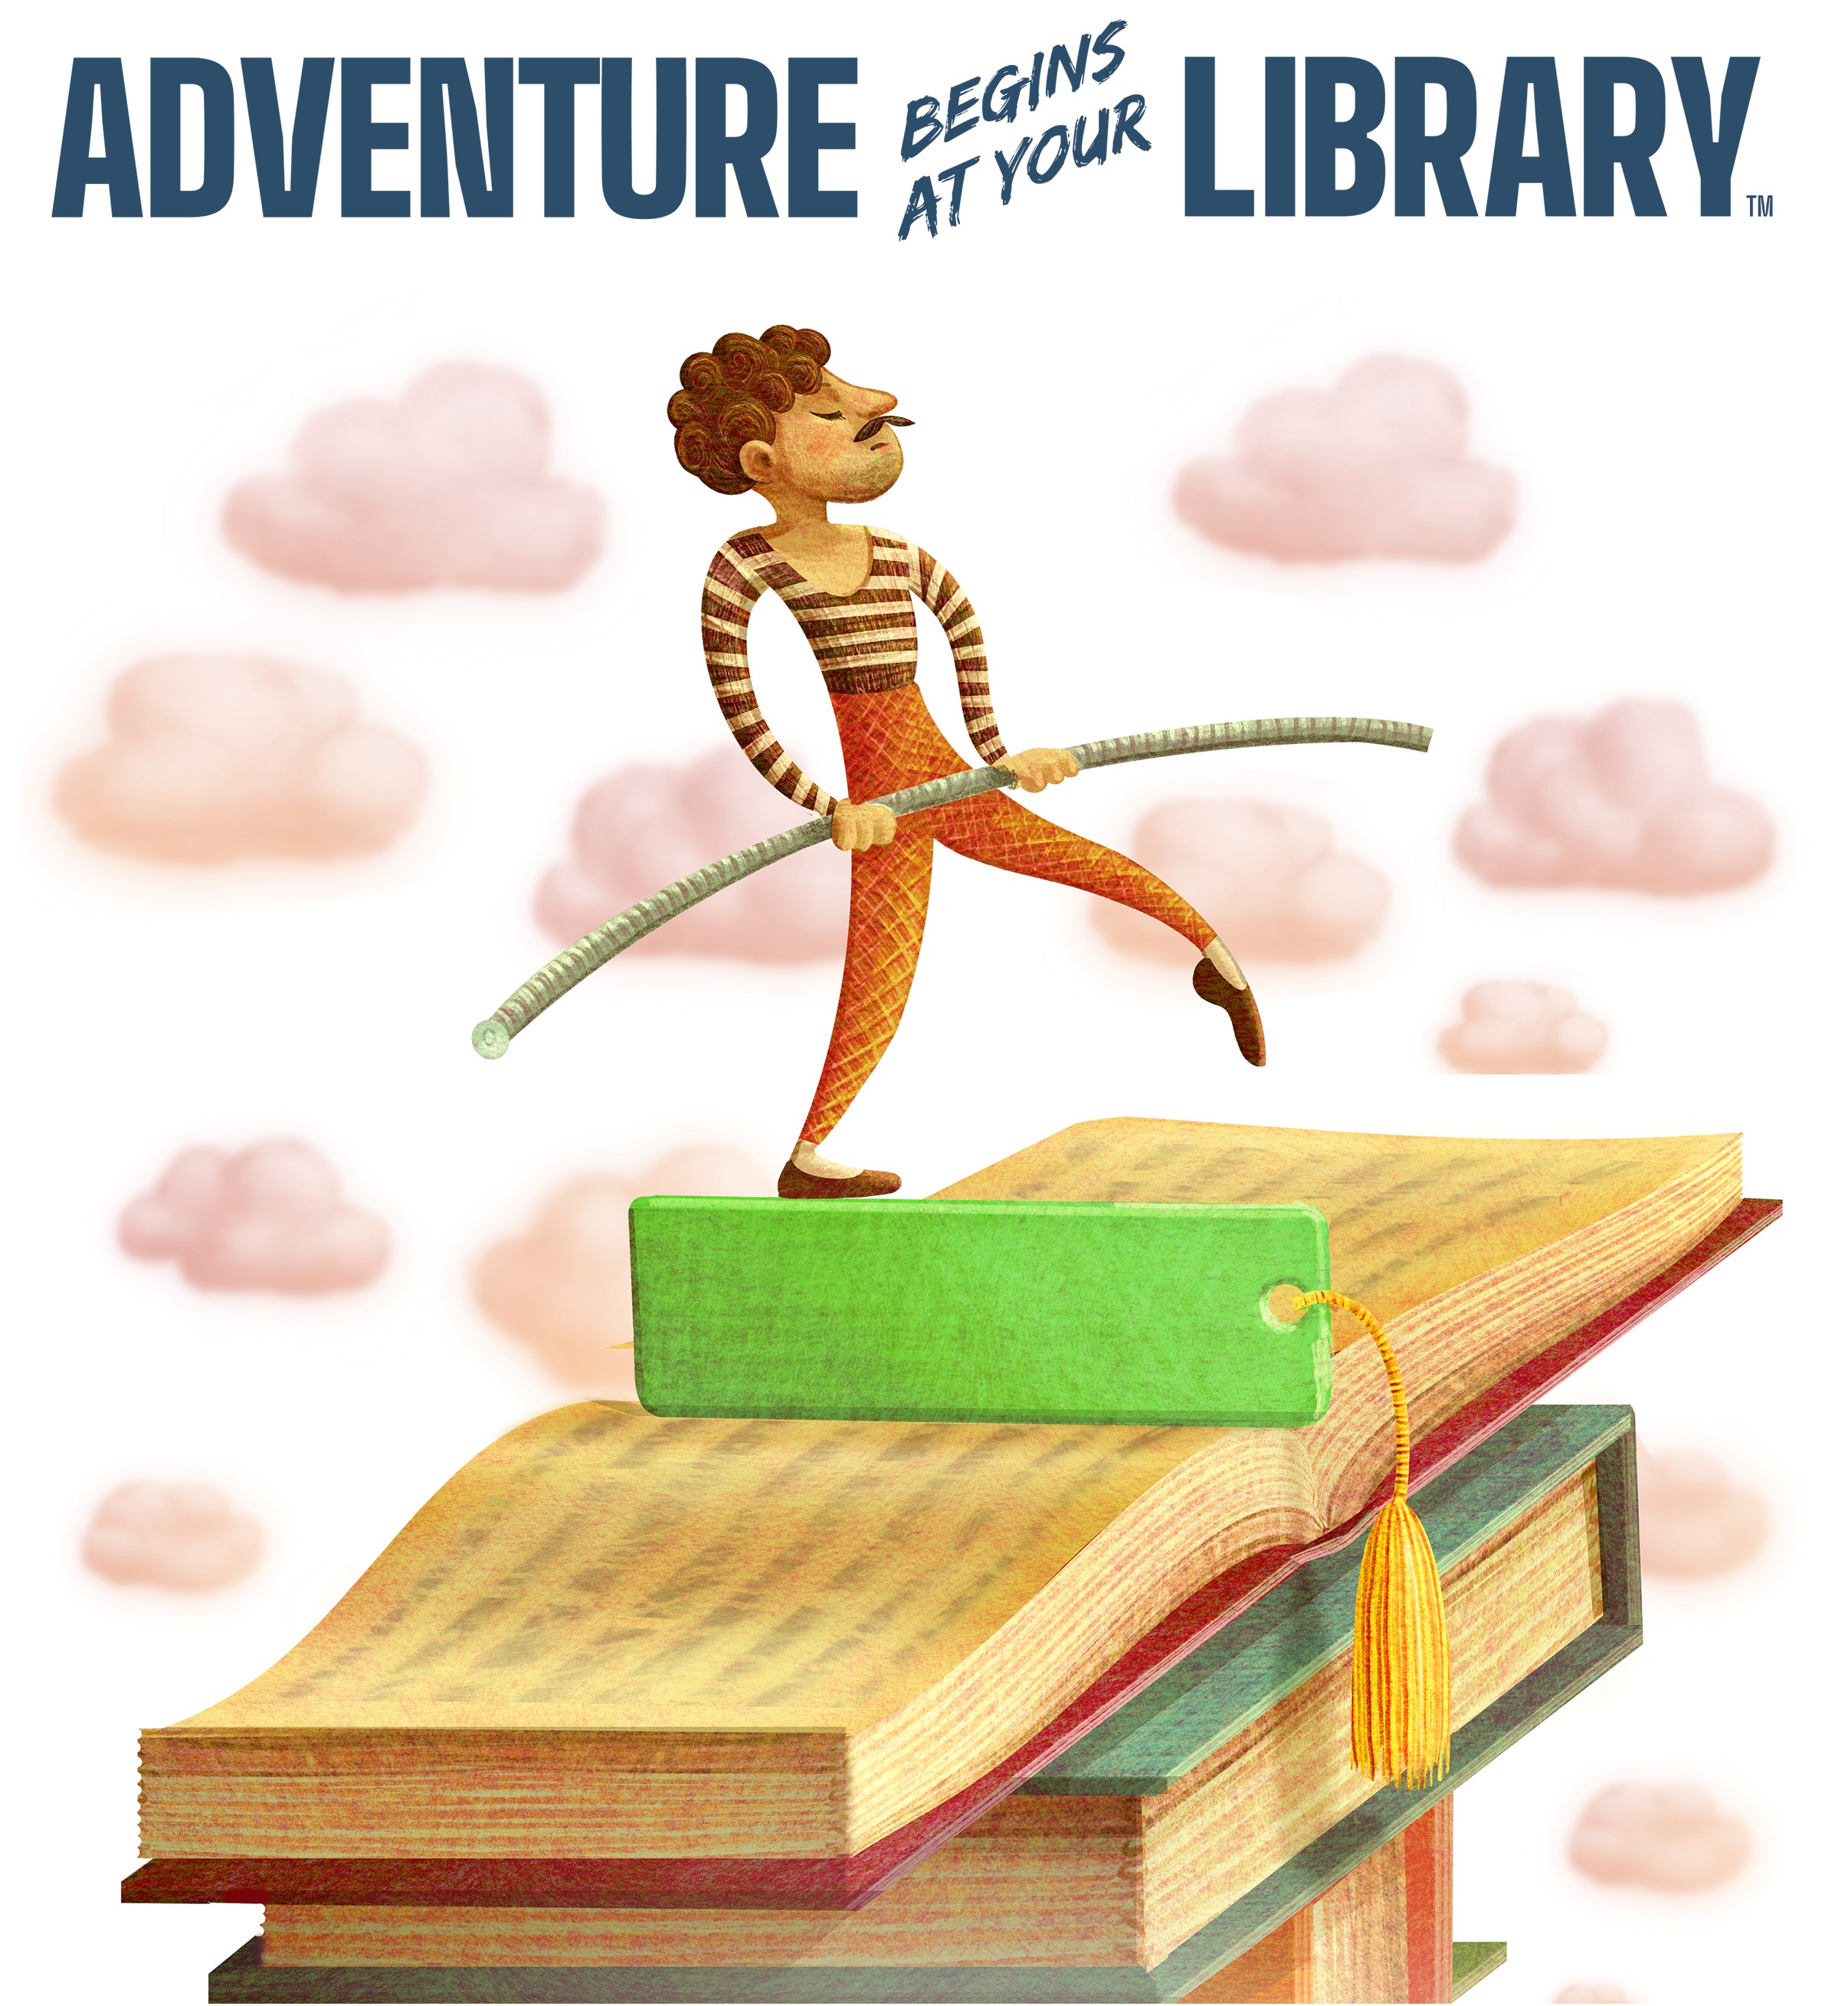 cartoon picture of tightrope walker walking a stack of books, text slogan reads "Adventure begins at your library"